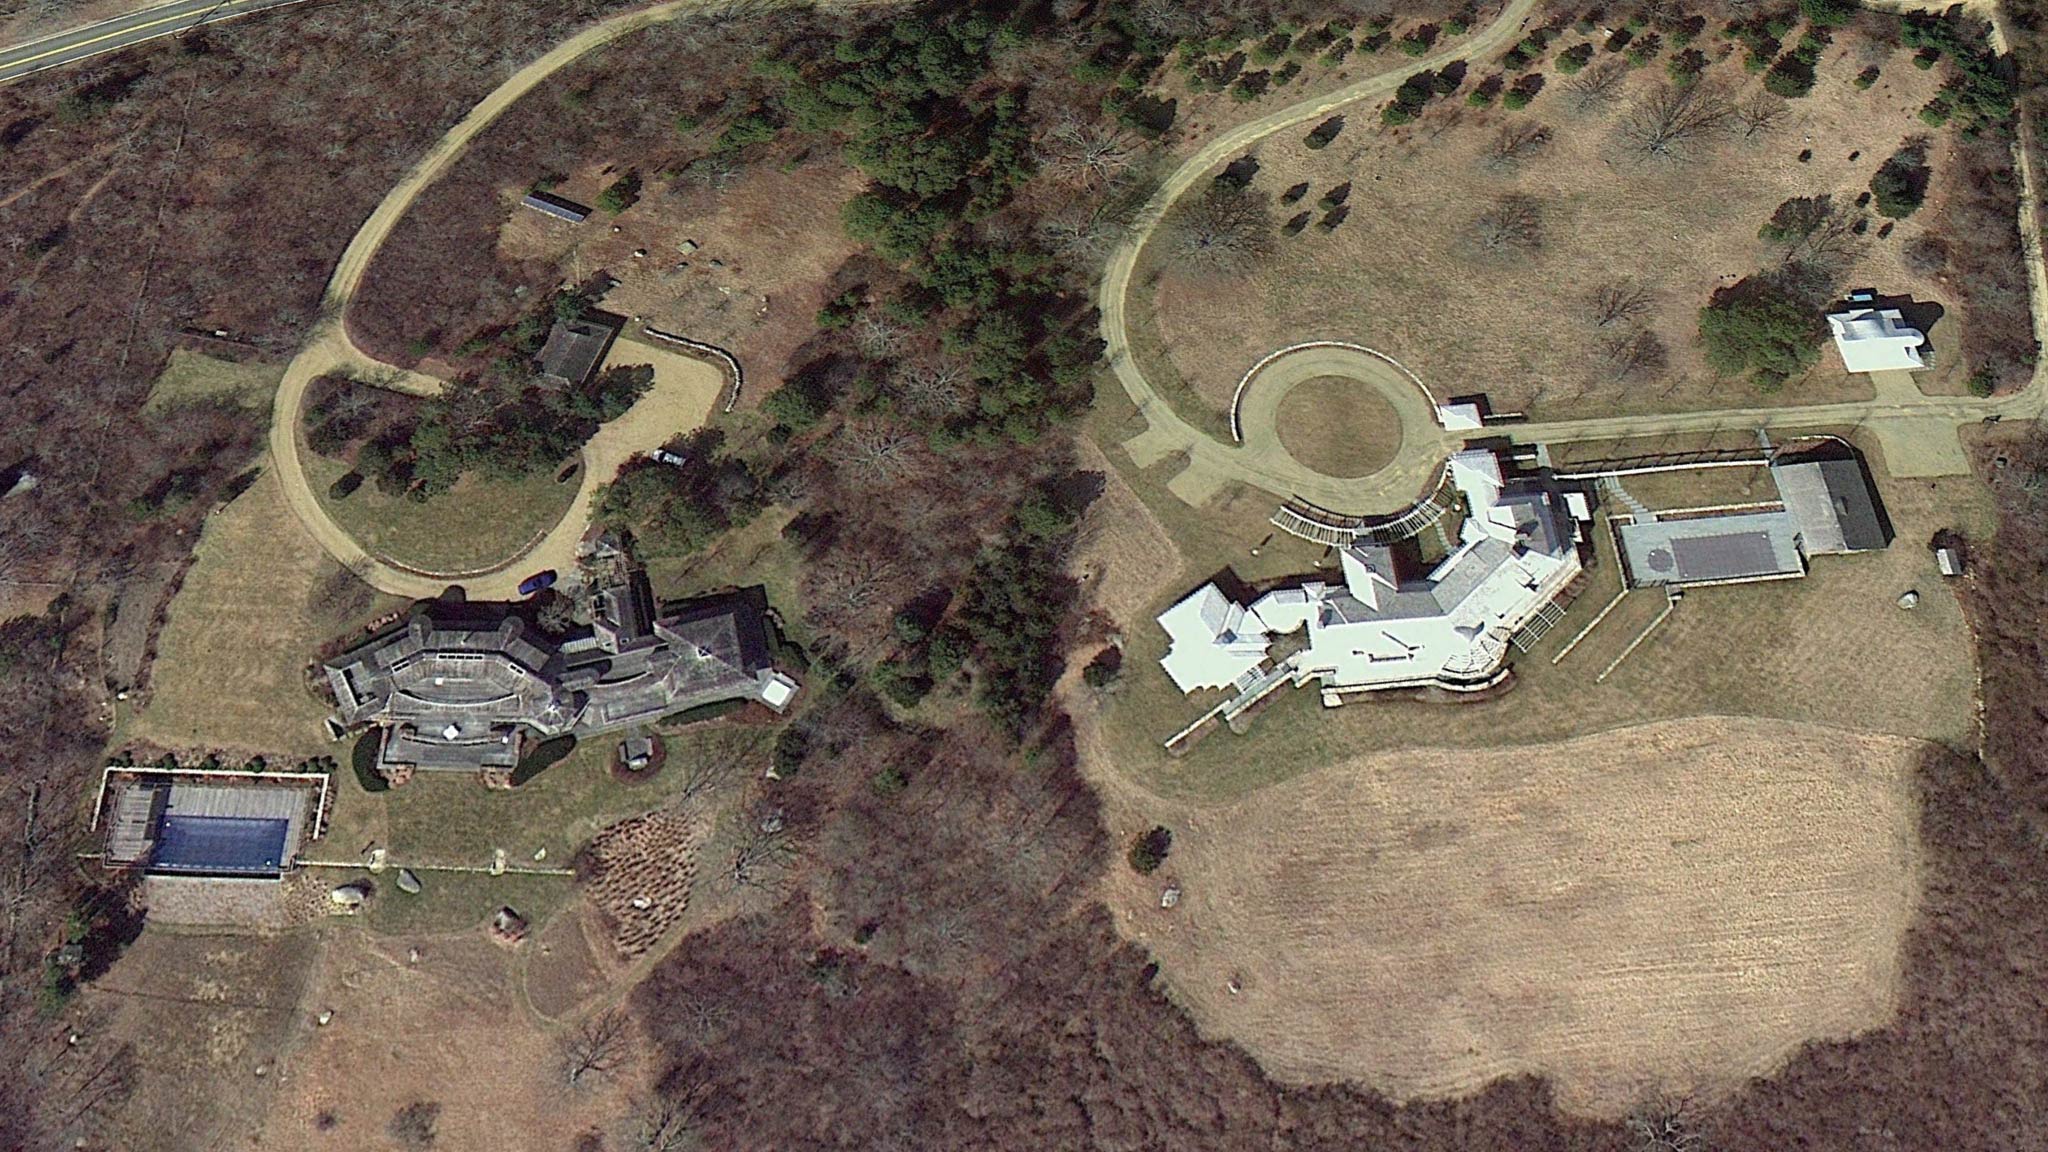 Martha's Vineyard satellite image from 2012 after mansions were built